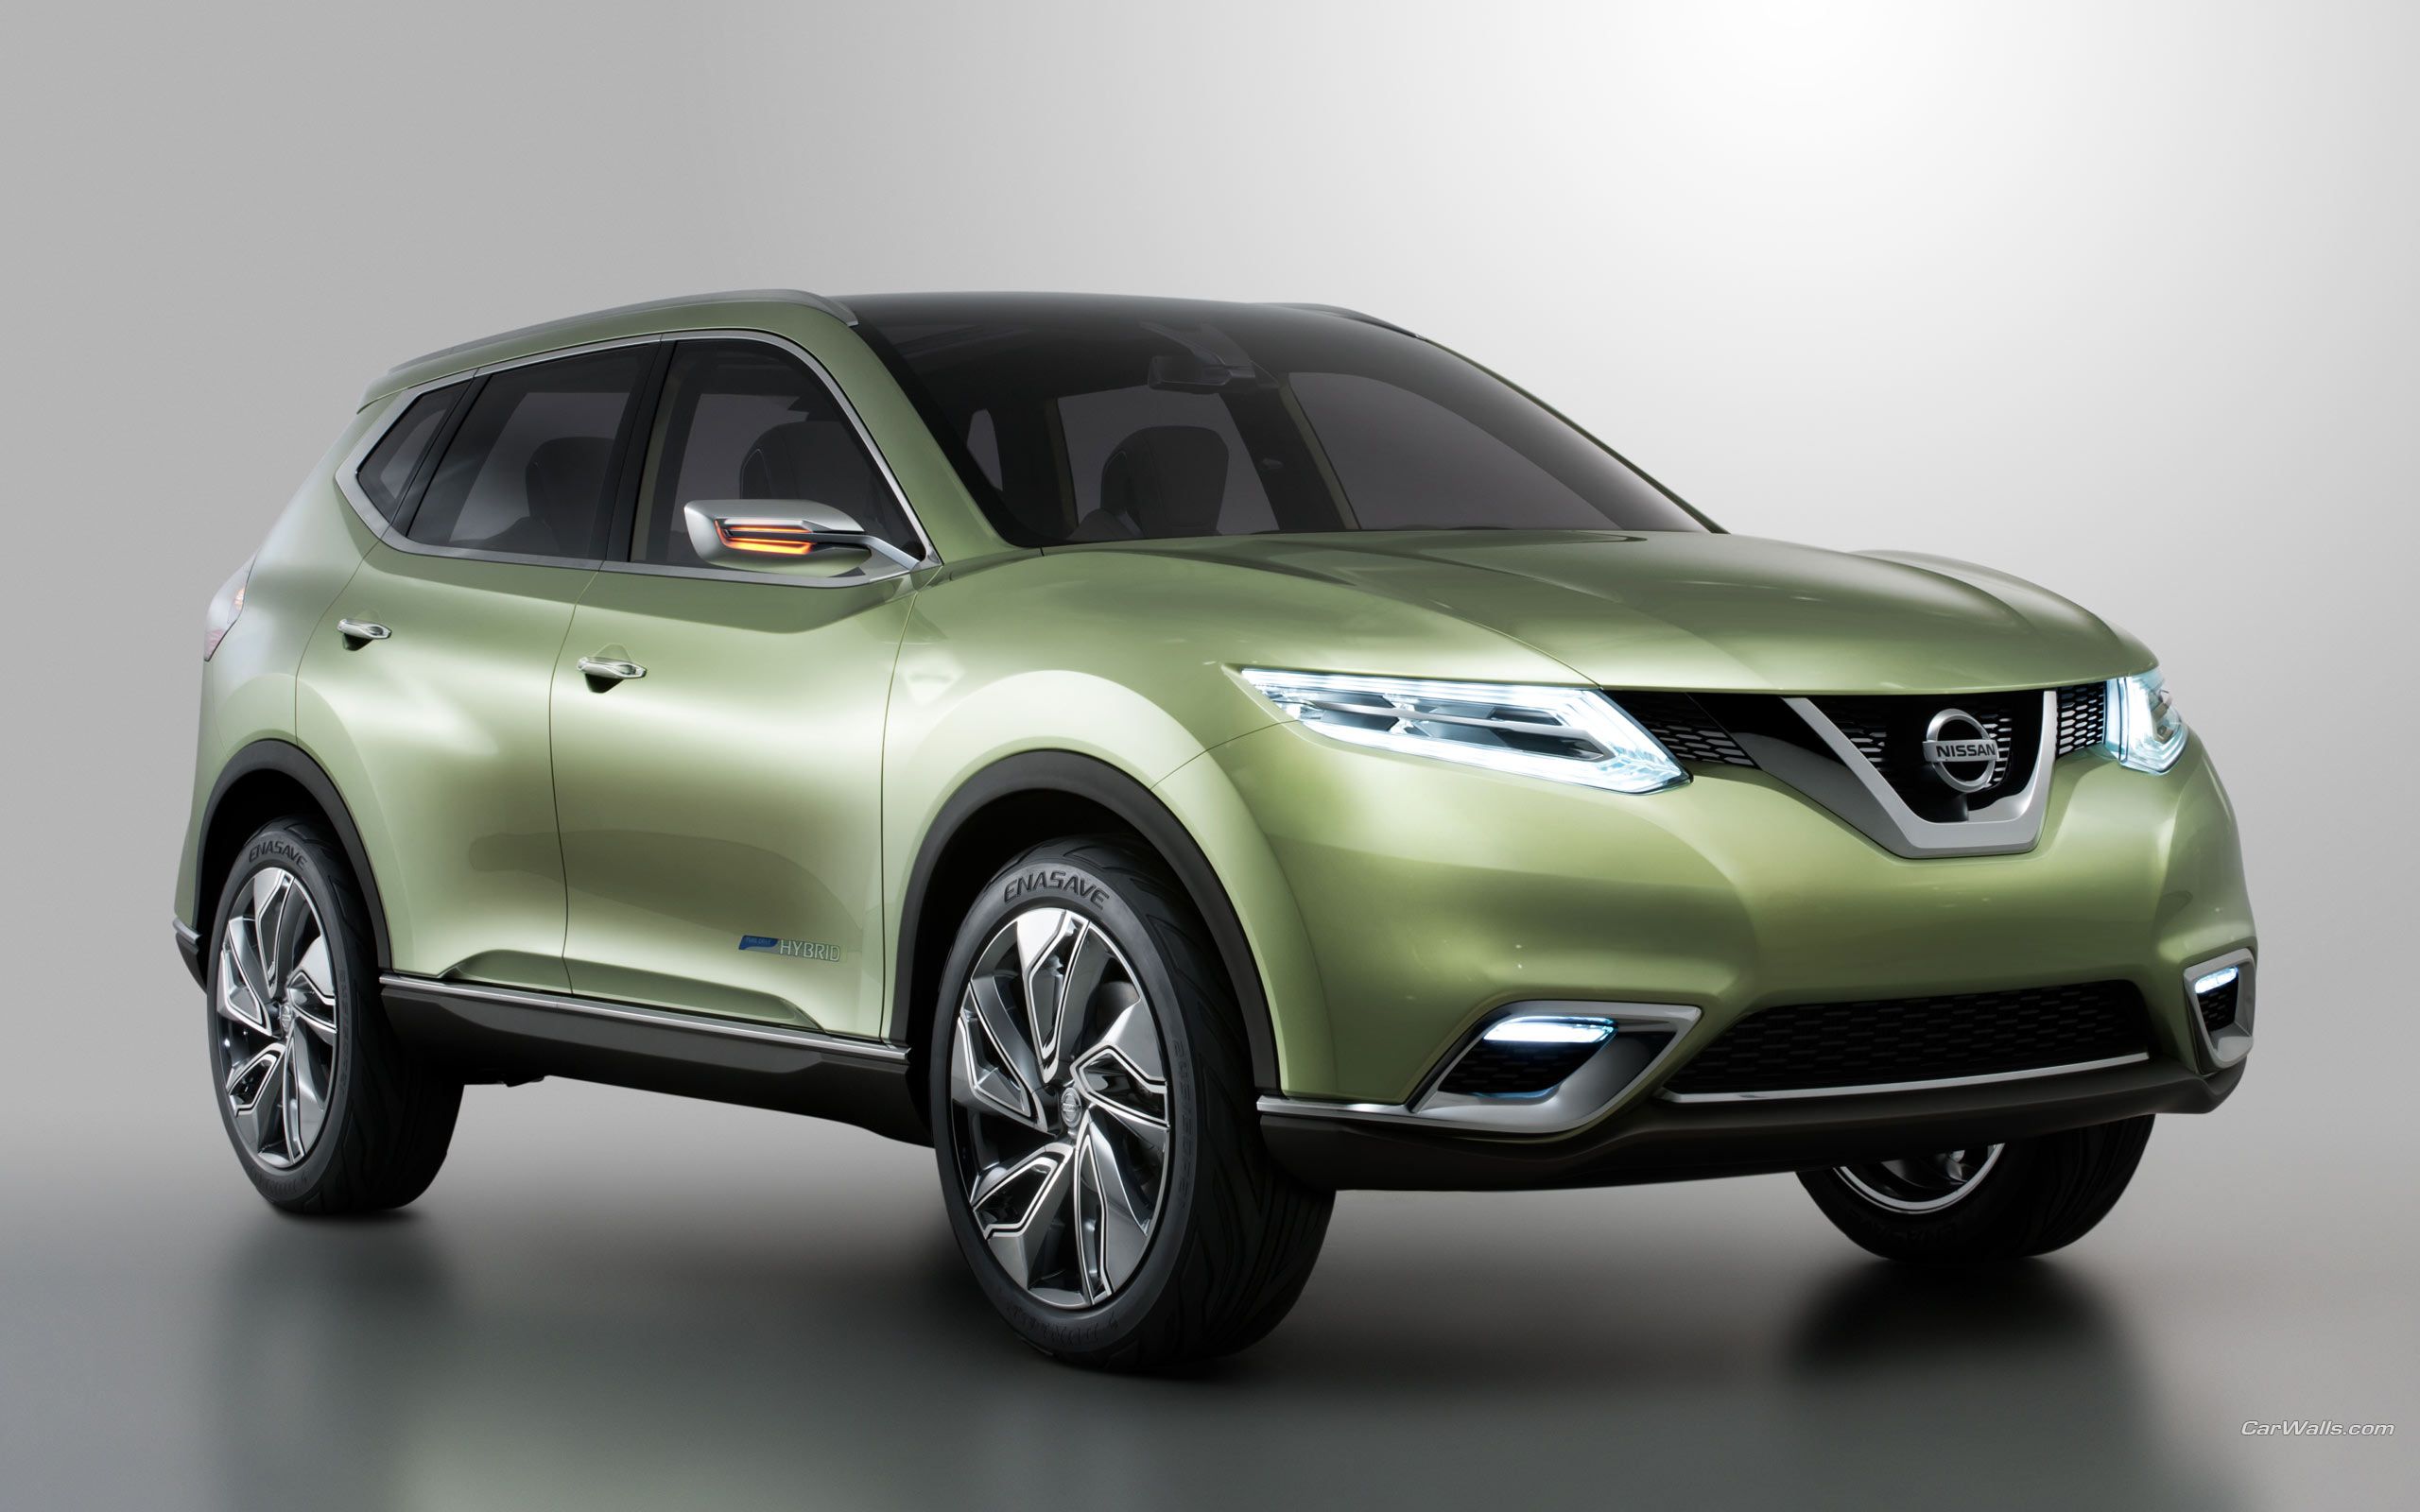 Wallpapers Nissan Cars Image Download